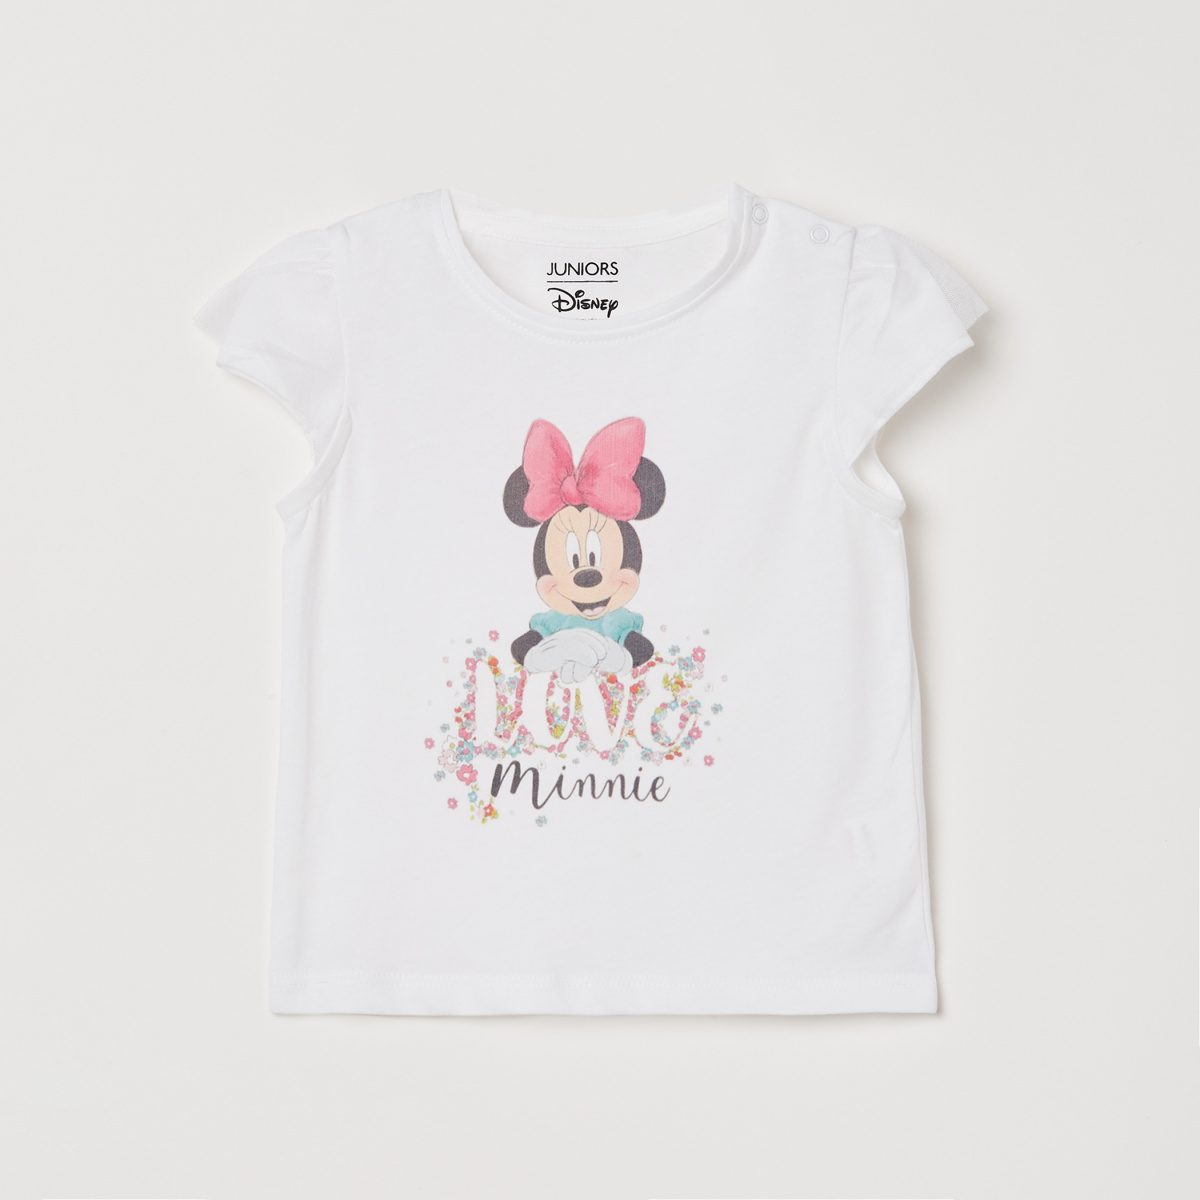 JUNIORS Girls Mickey Mouse Print Top